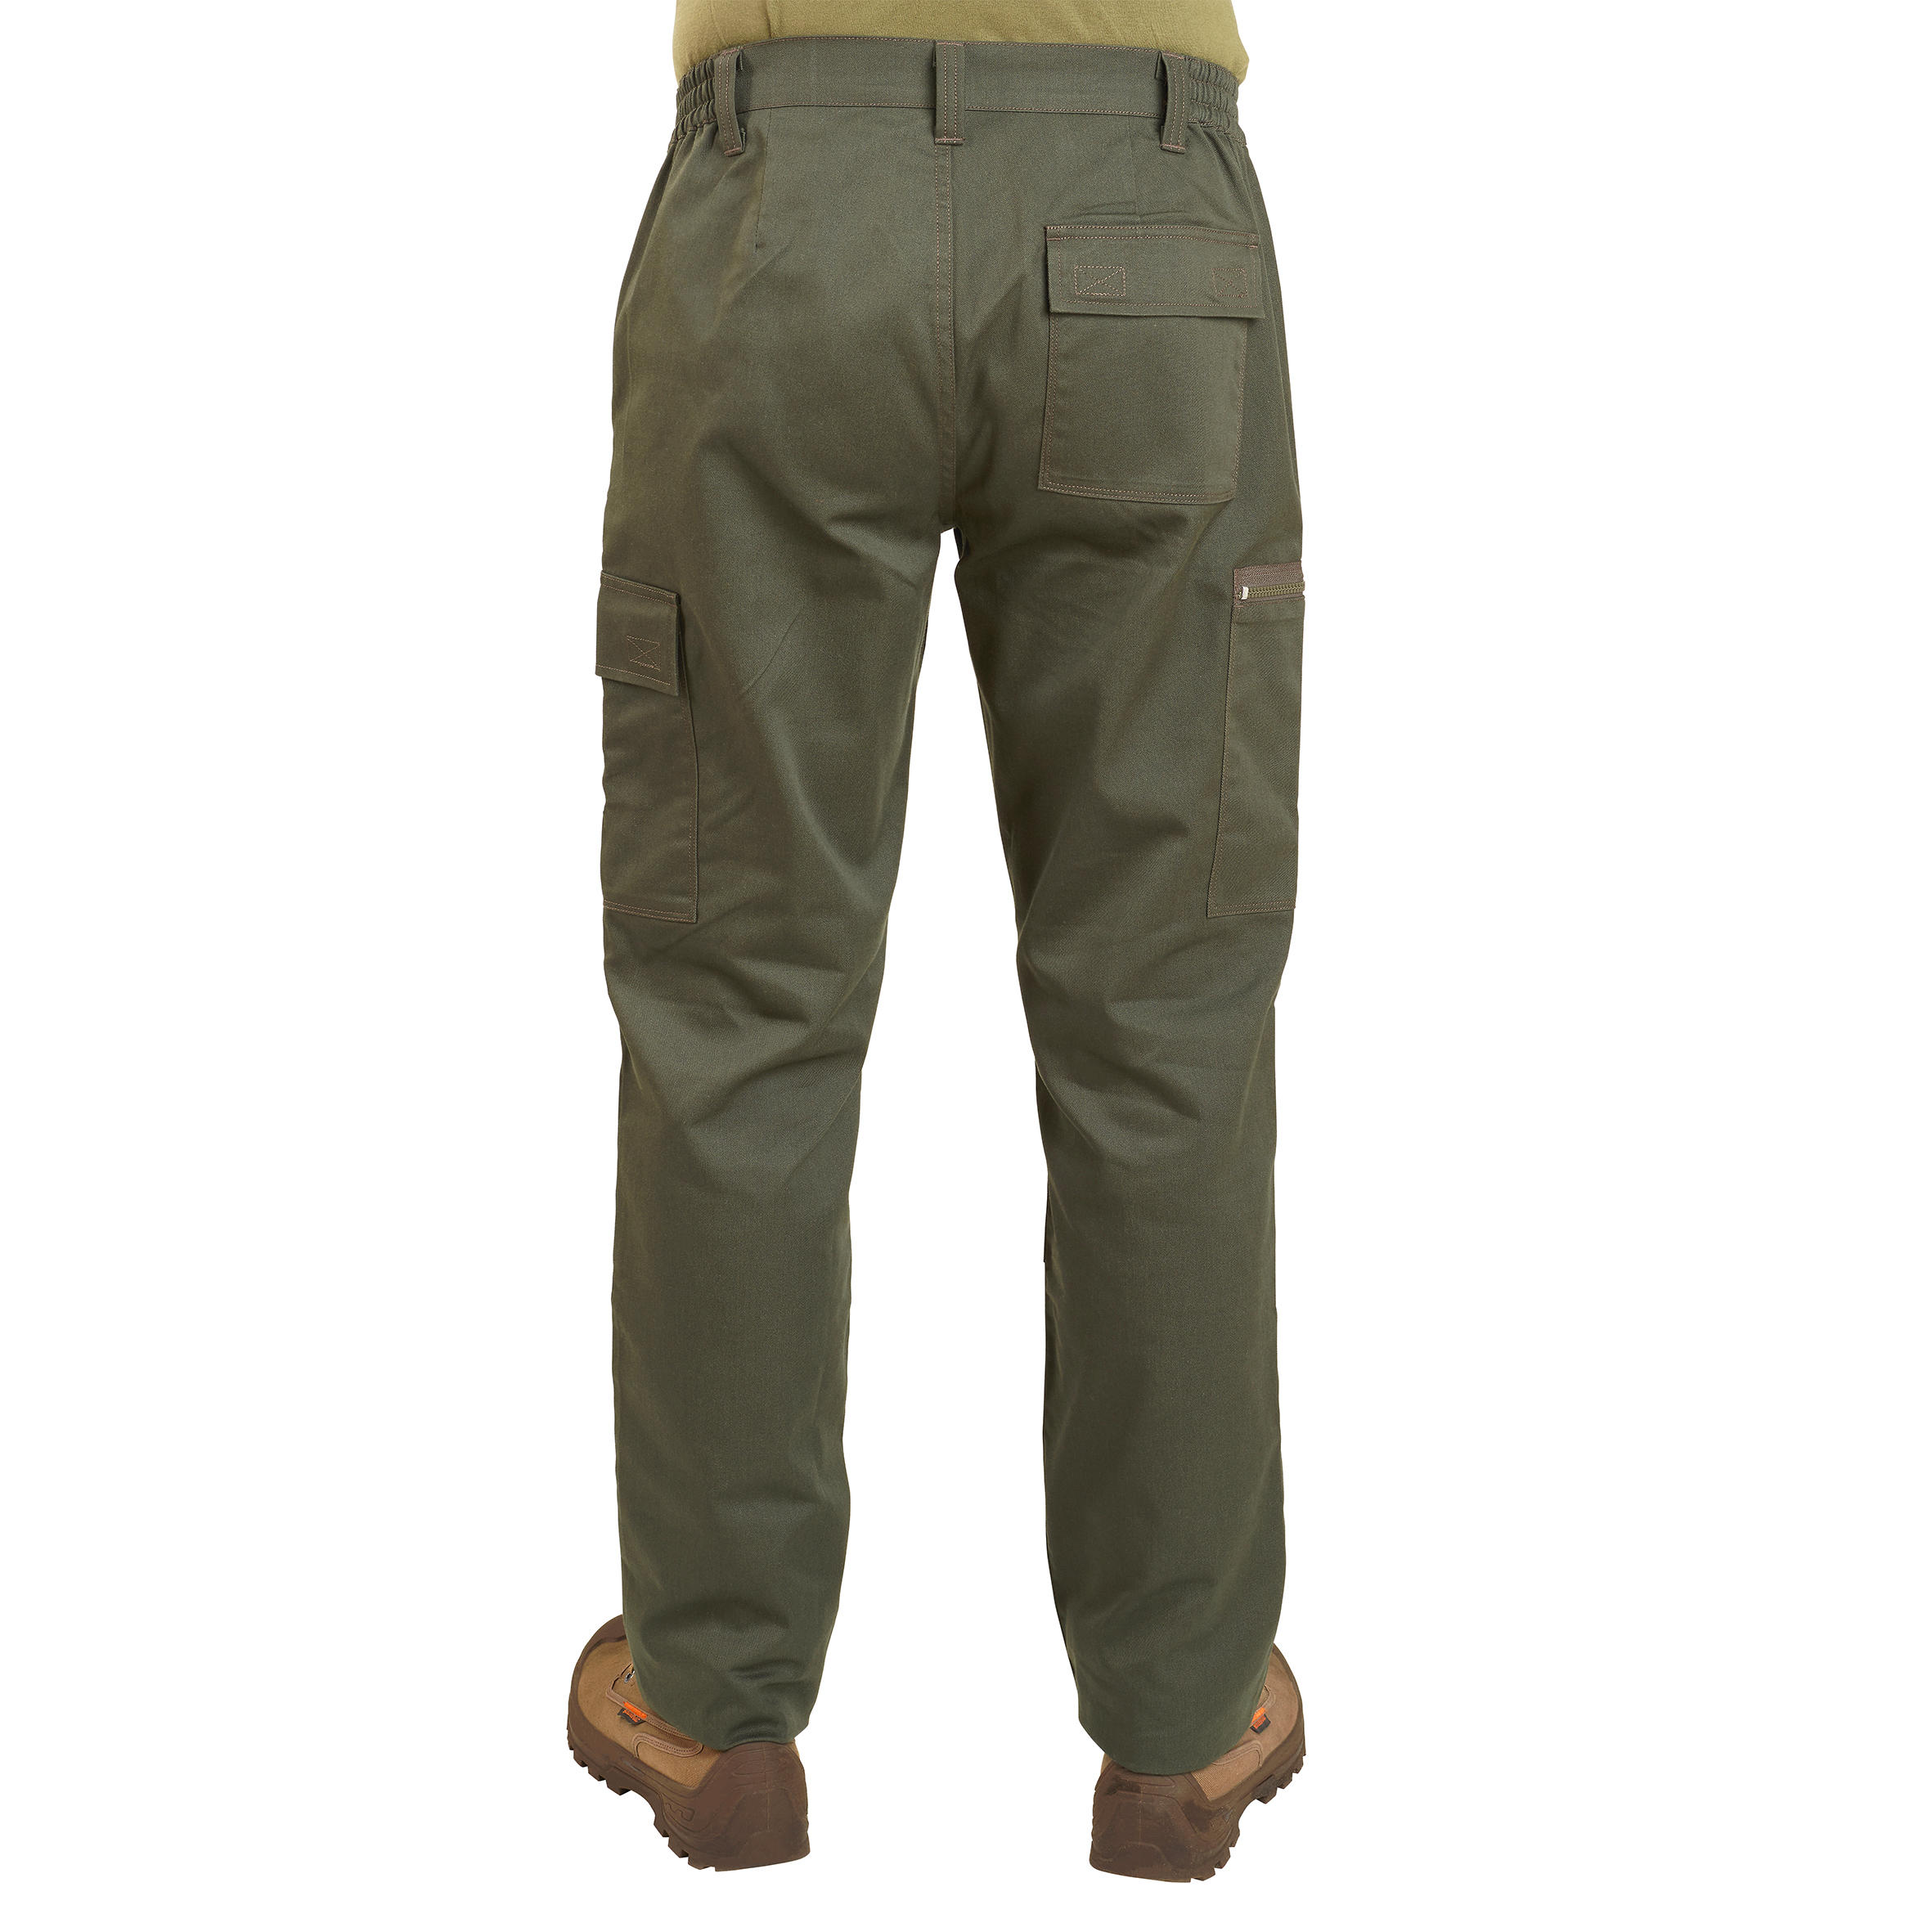 STEPPE 300 SOLOGNAC  Looking for a durable trouser Then this could be  your perfect choice SG 300 Durable trousers having elastic waistband for  better comfort with 5  By Decathlon Sports India  Facebook